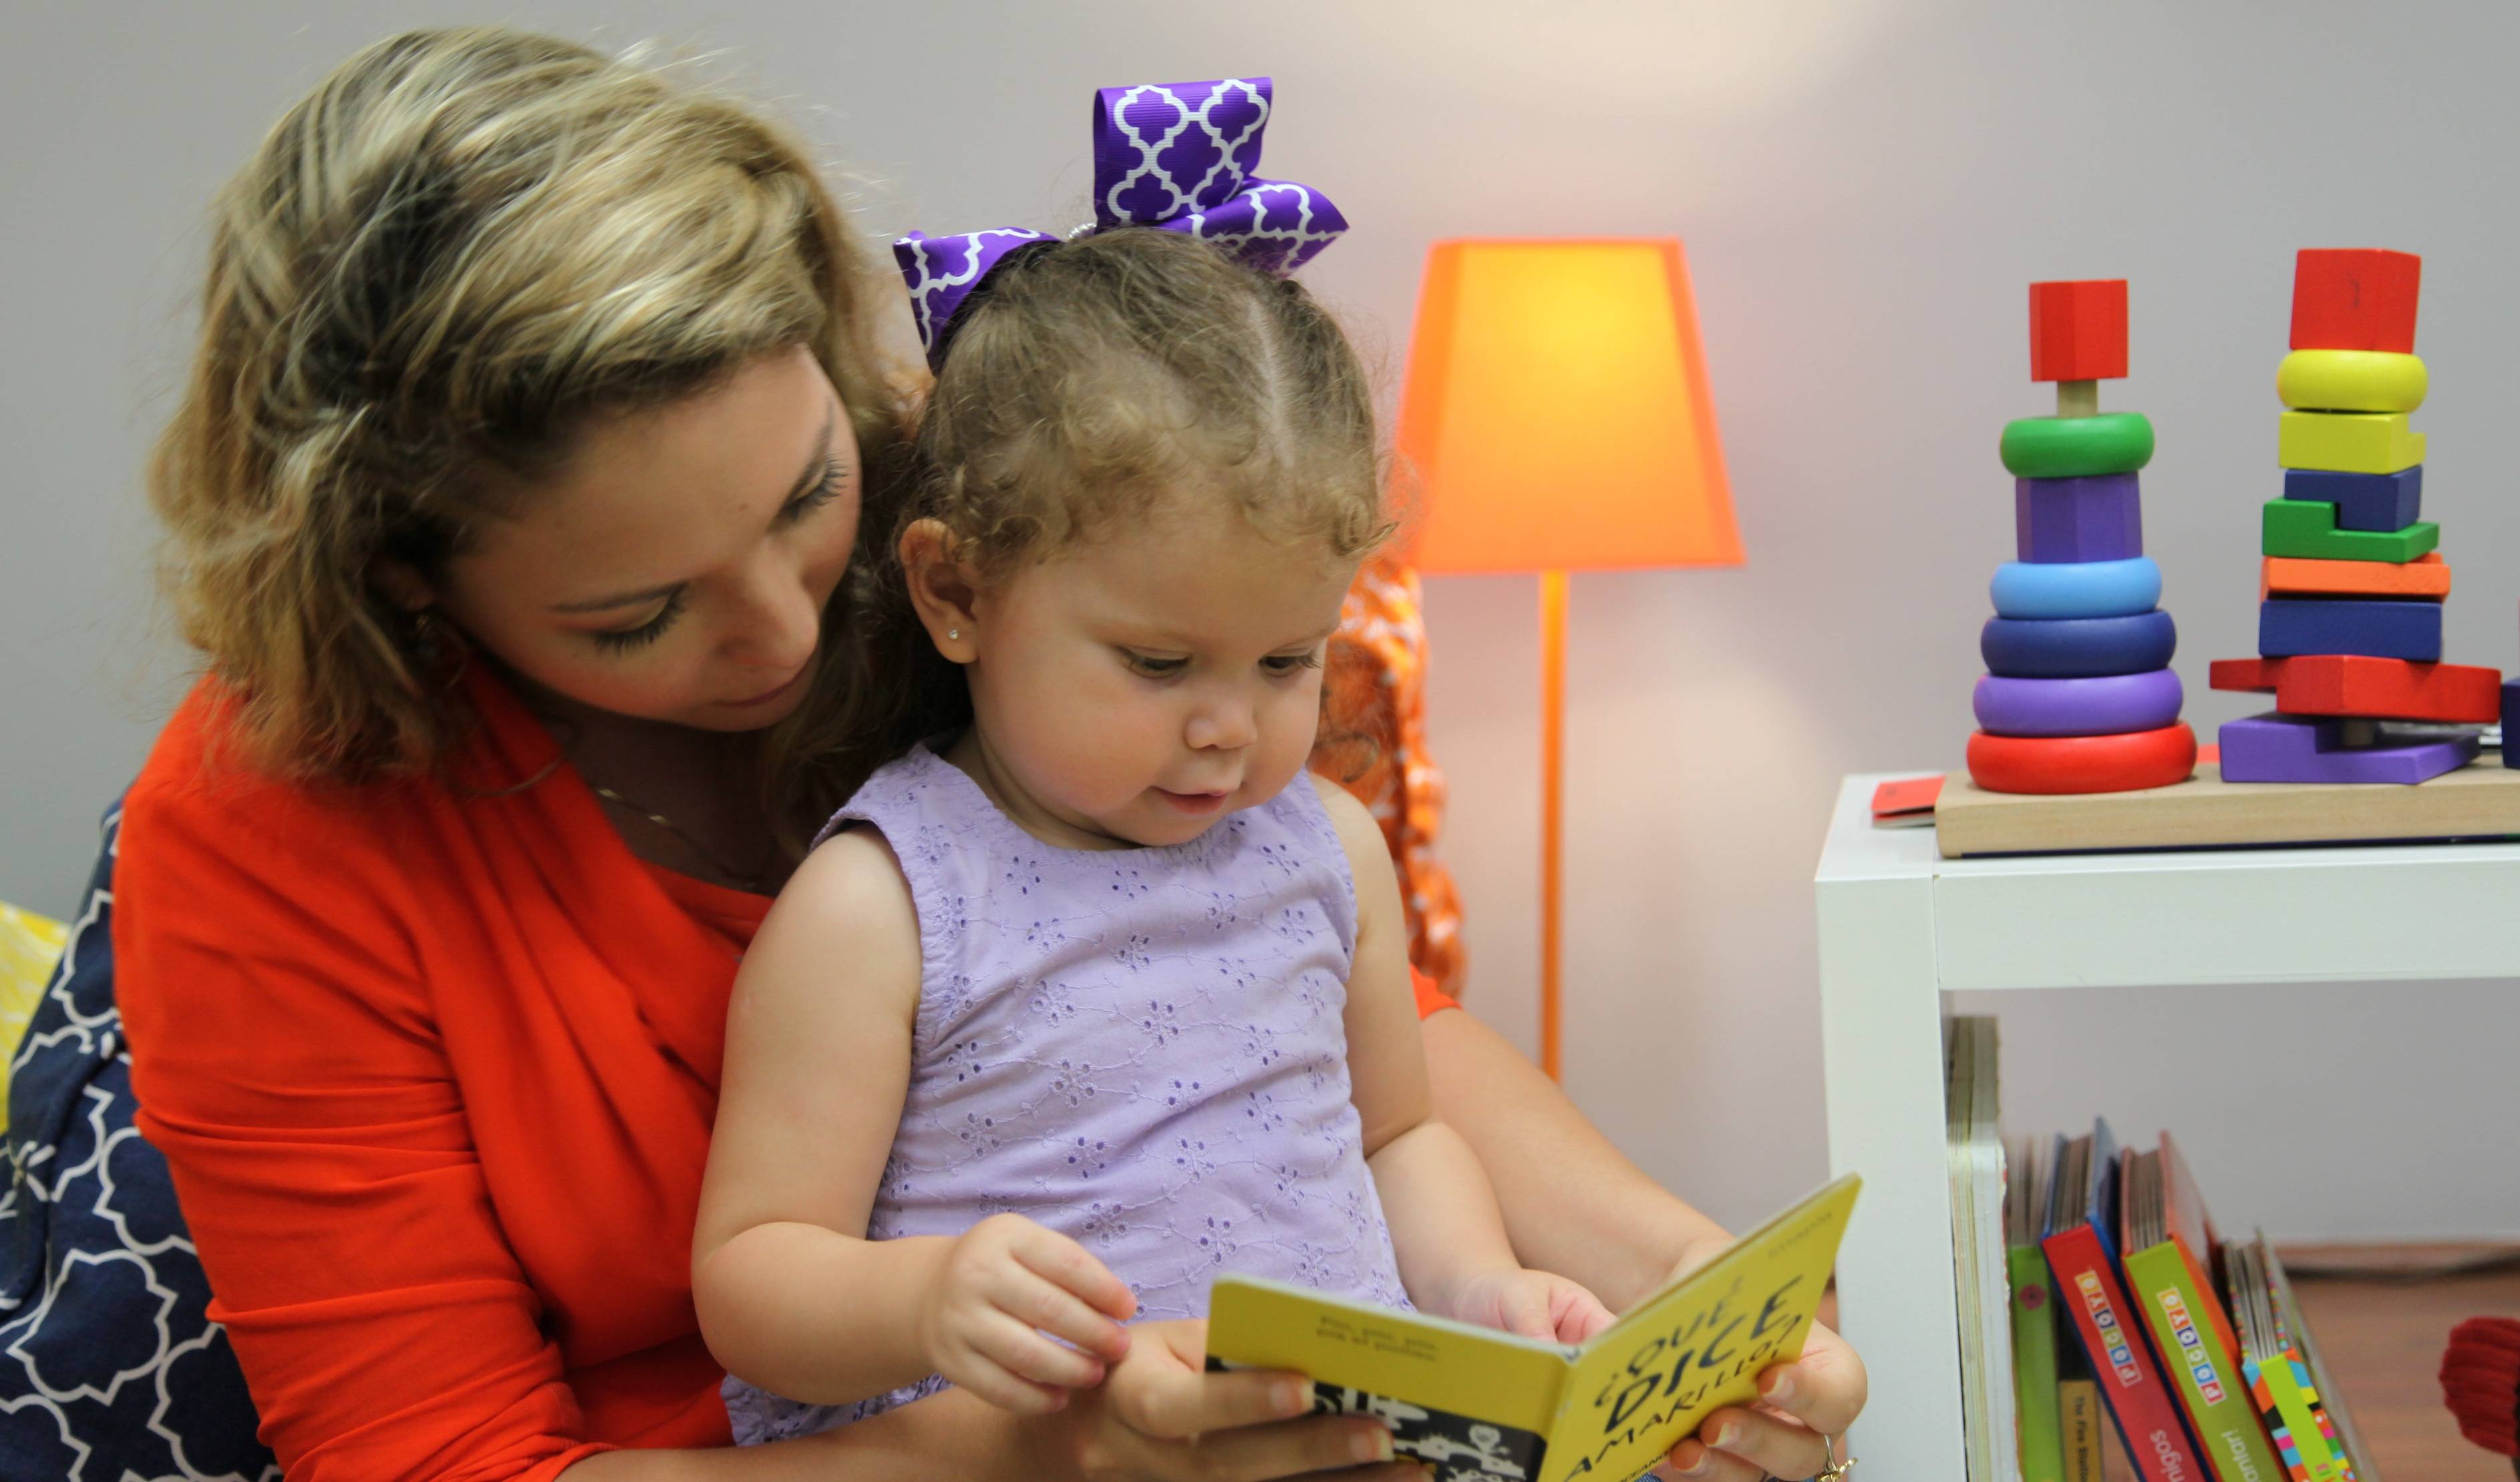 mom and daughter reading a book that teach self-control